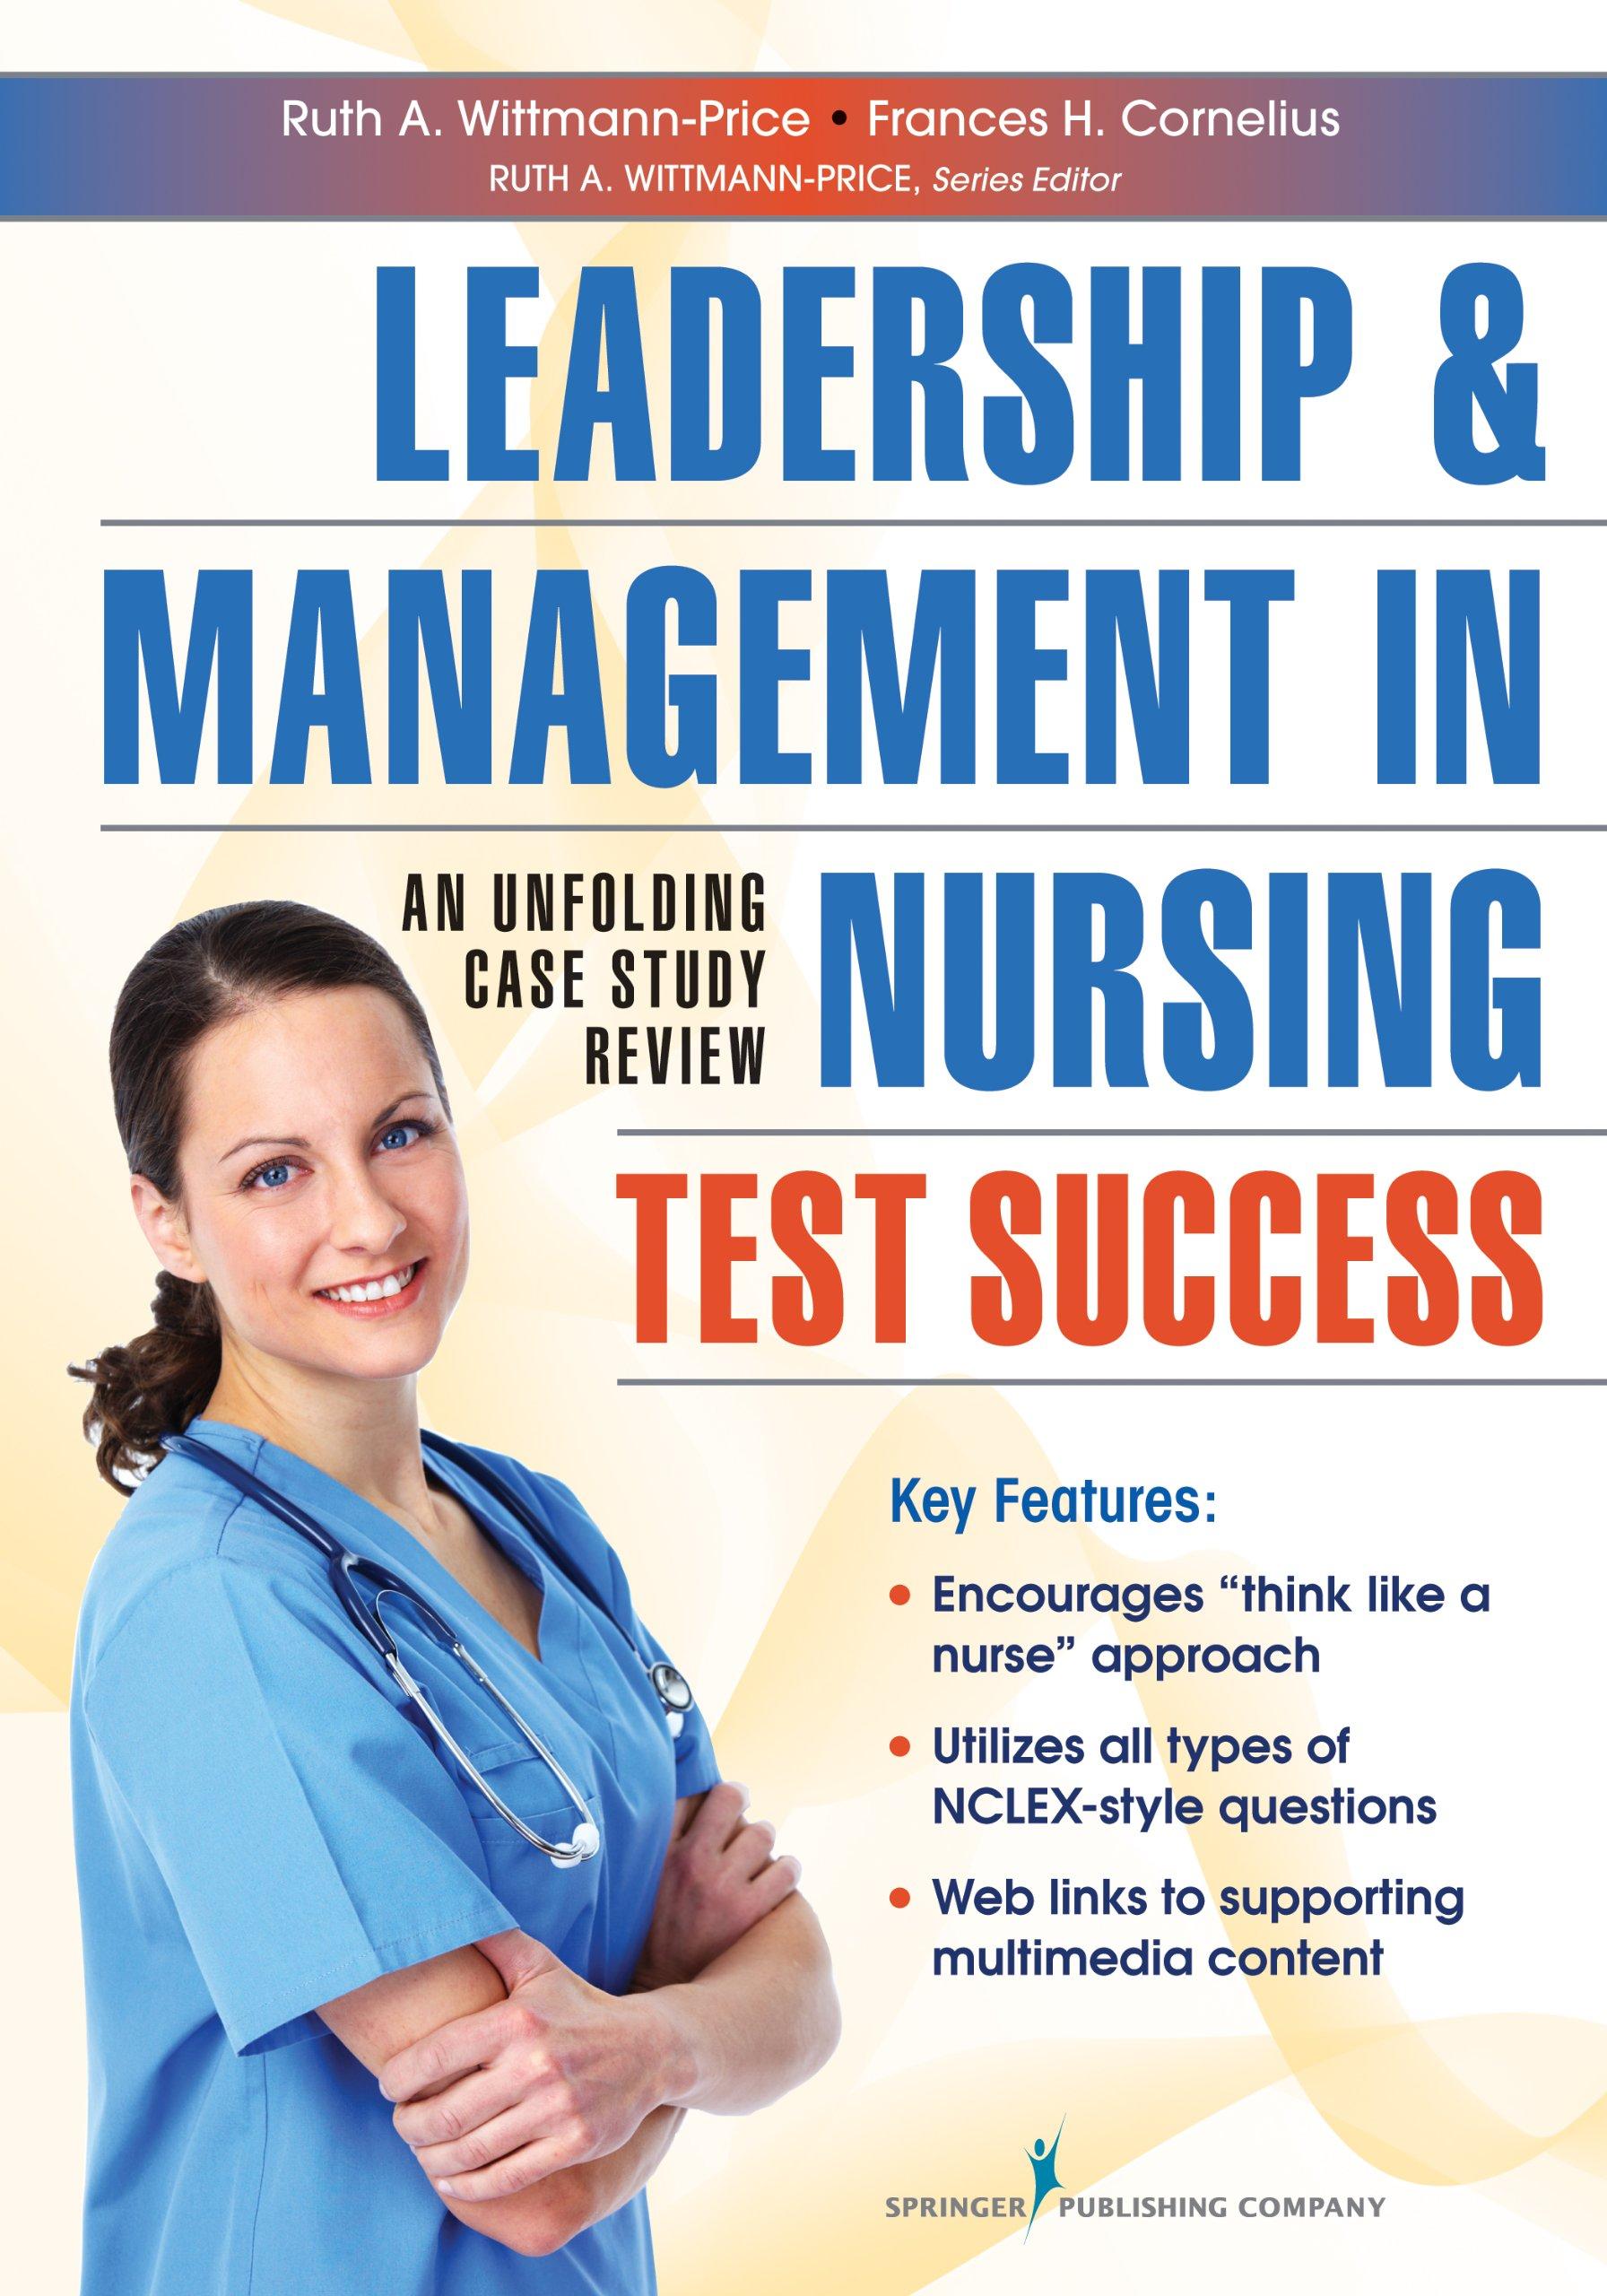 leadership and management in nursing test success an unfolding case study review 1st edition ruth a.